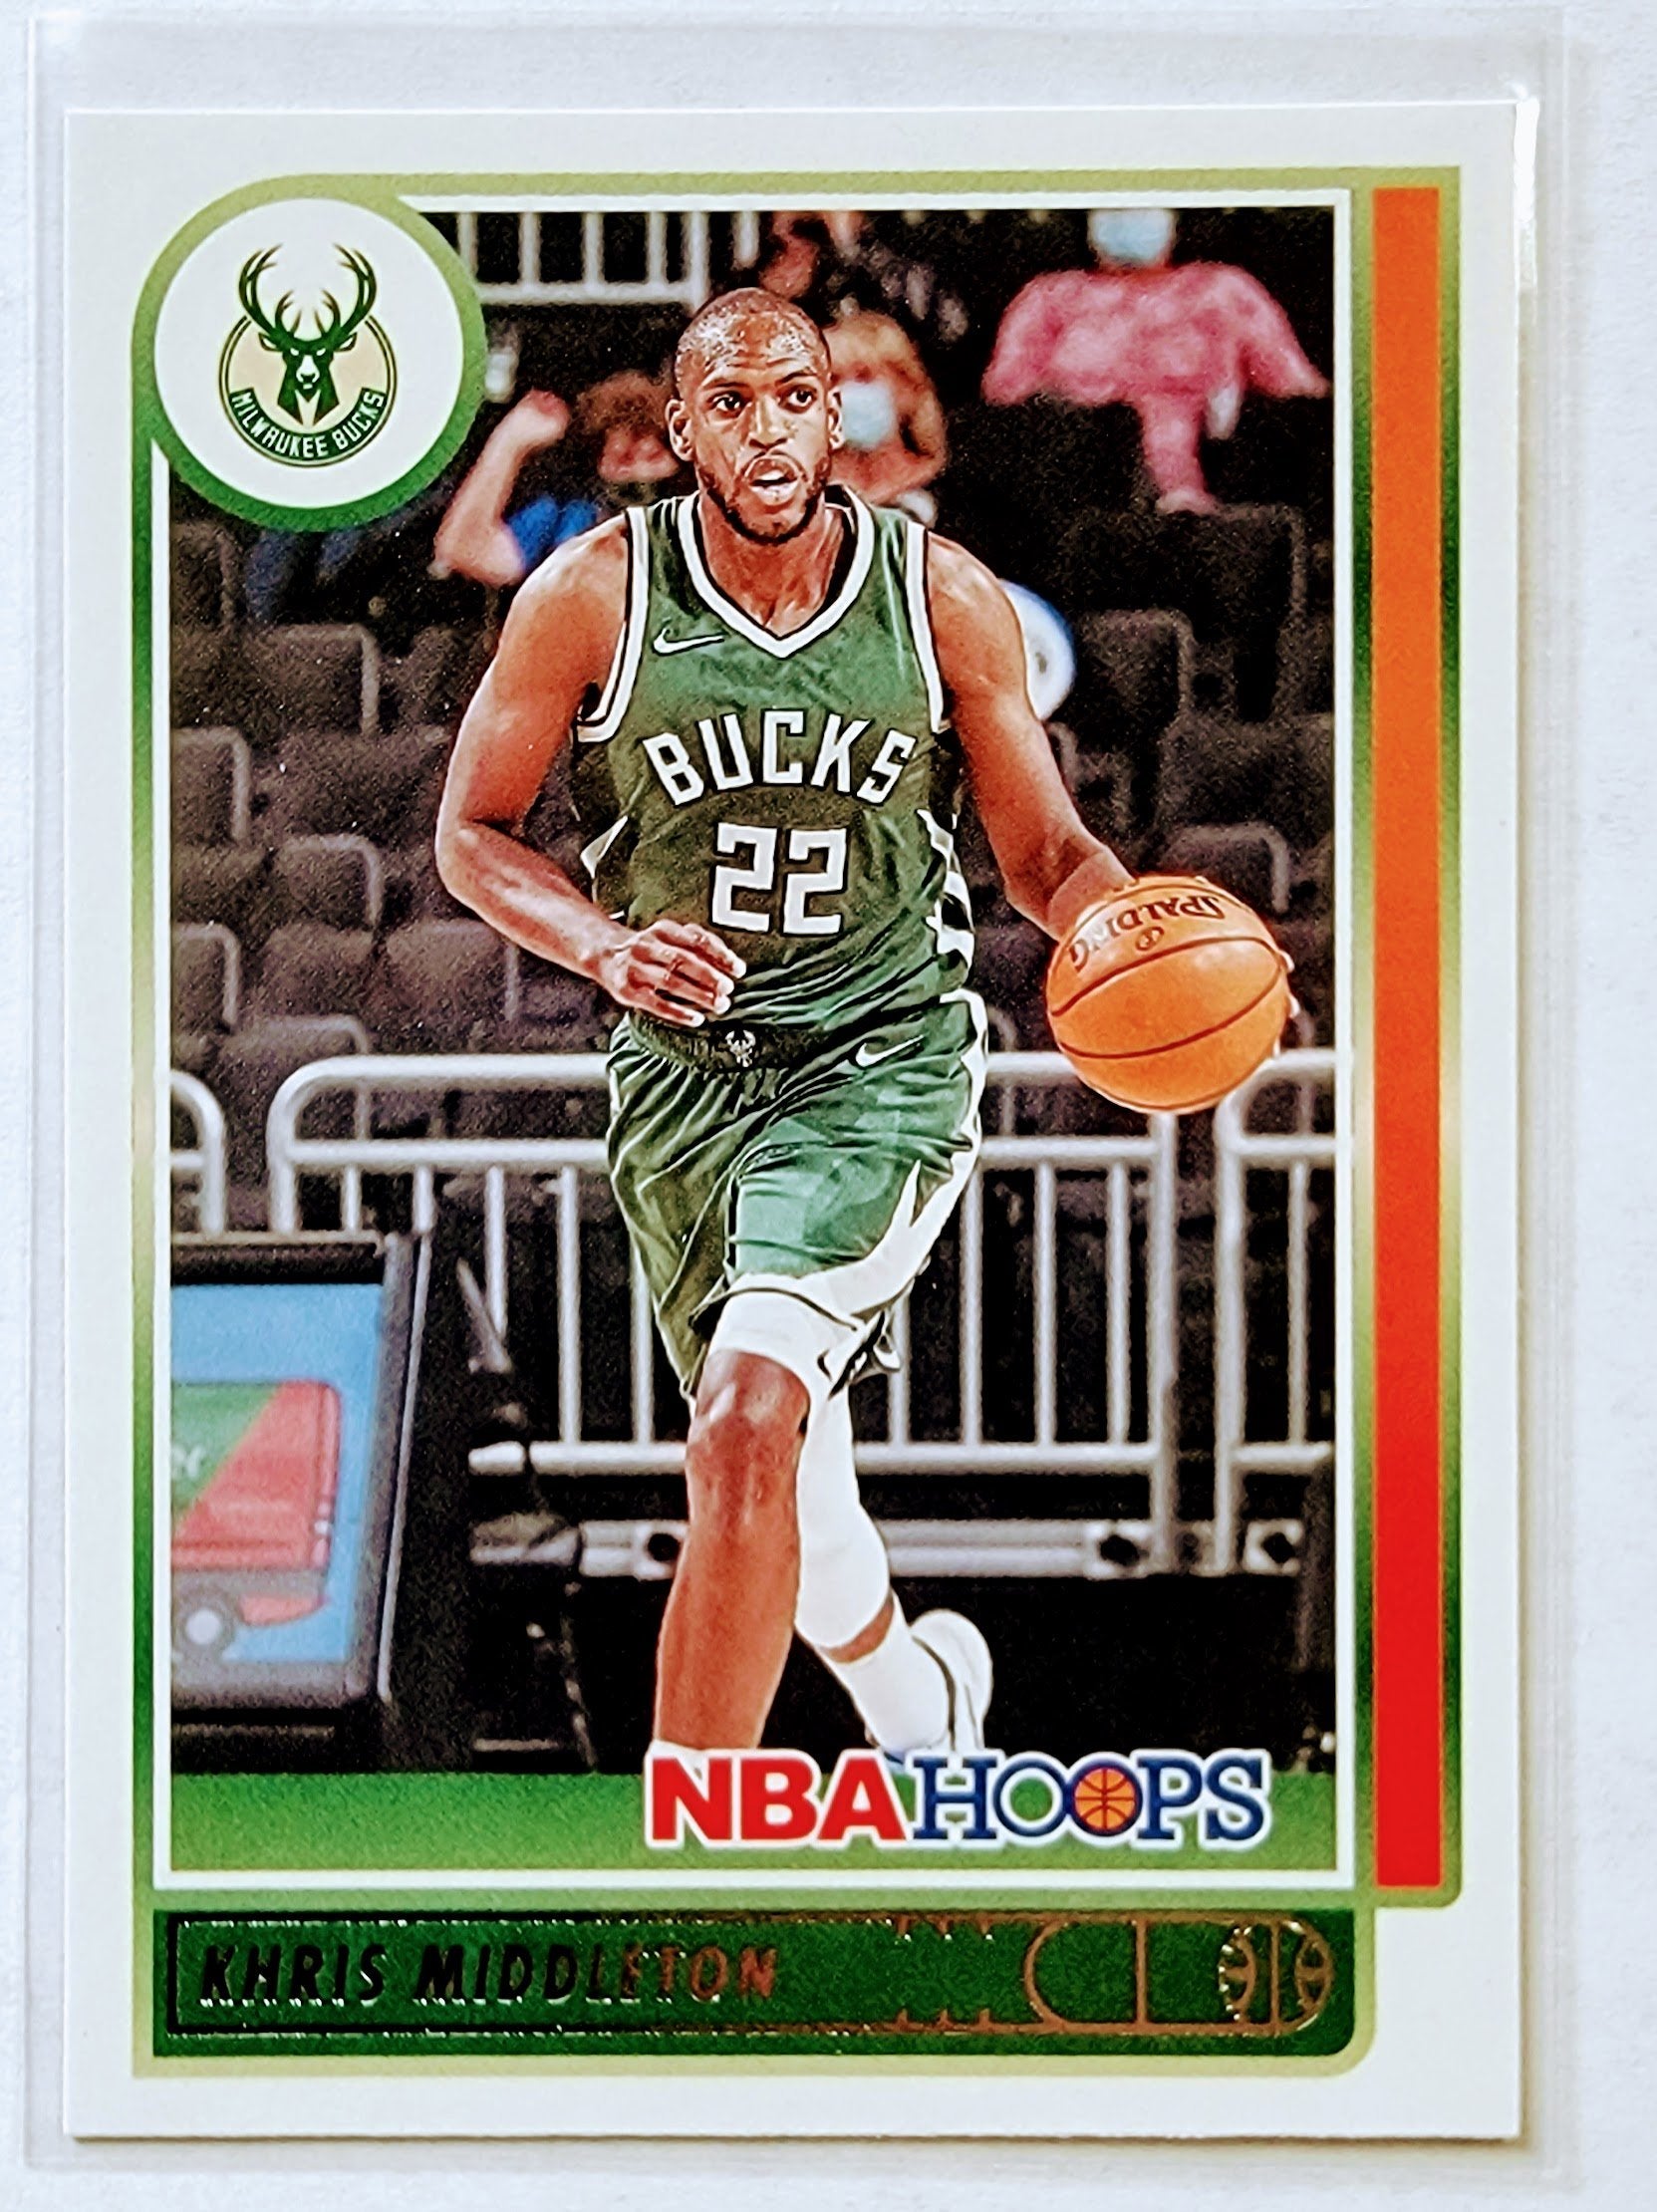 2021-22 Panini NBA Hoops Kris Middleton Basketball Card AVM1 simple Xclusive Collectibles   